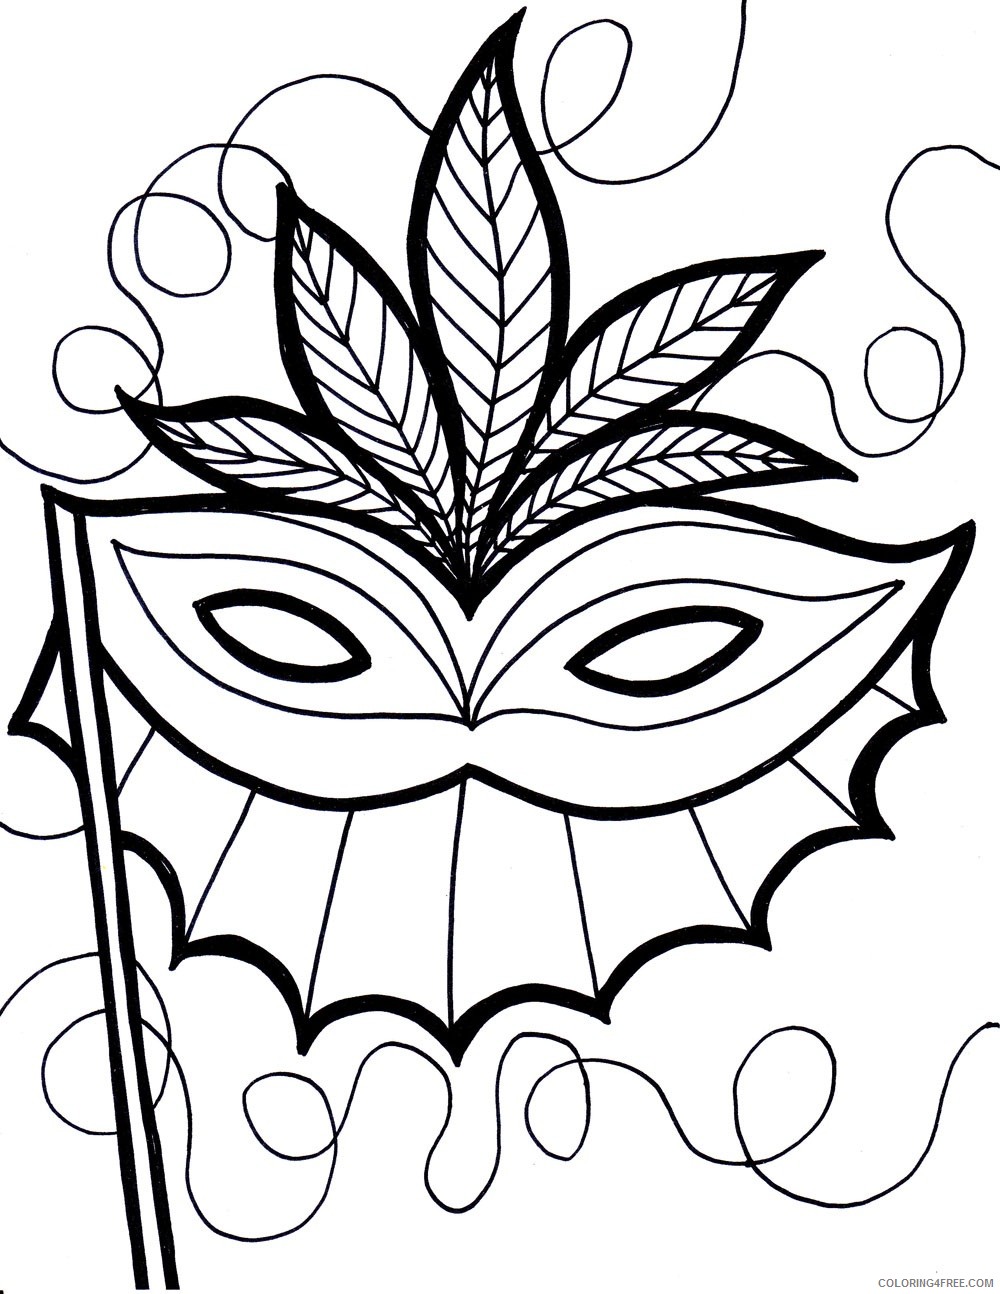 mardi gras coloring pages printable Coloring4free